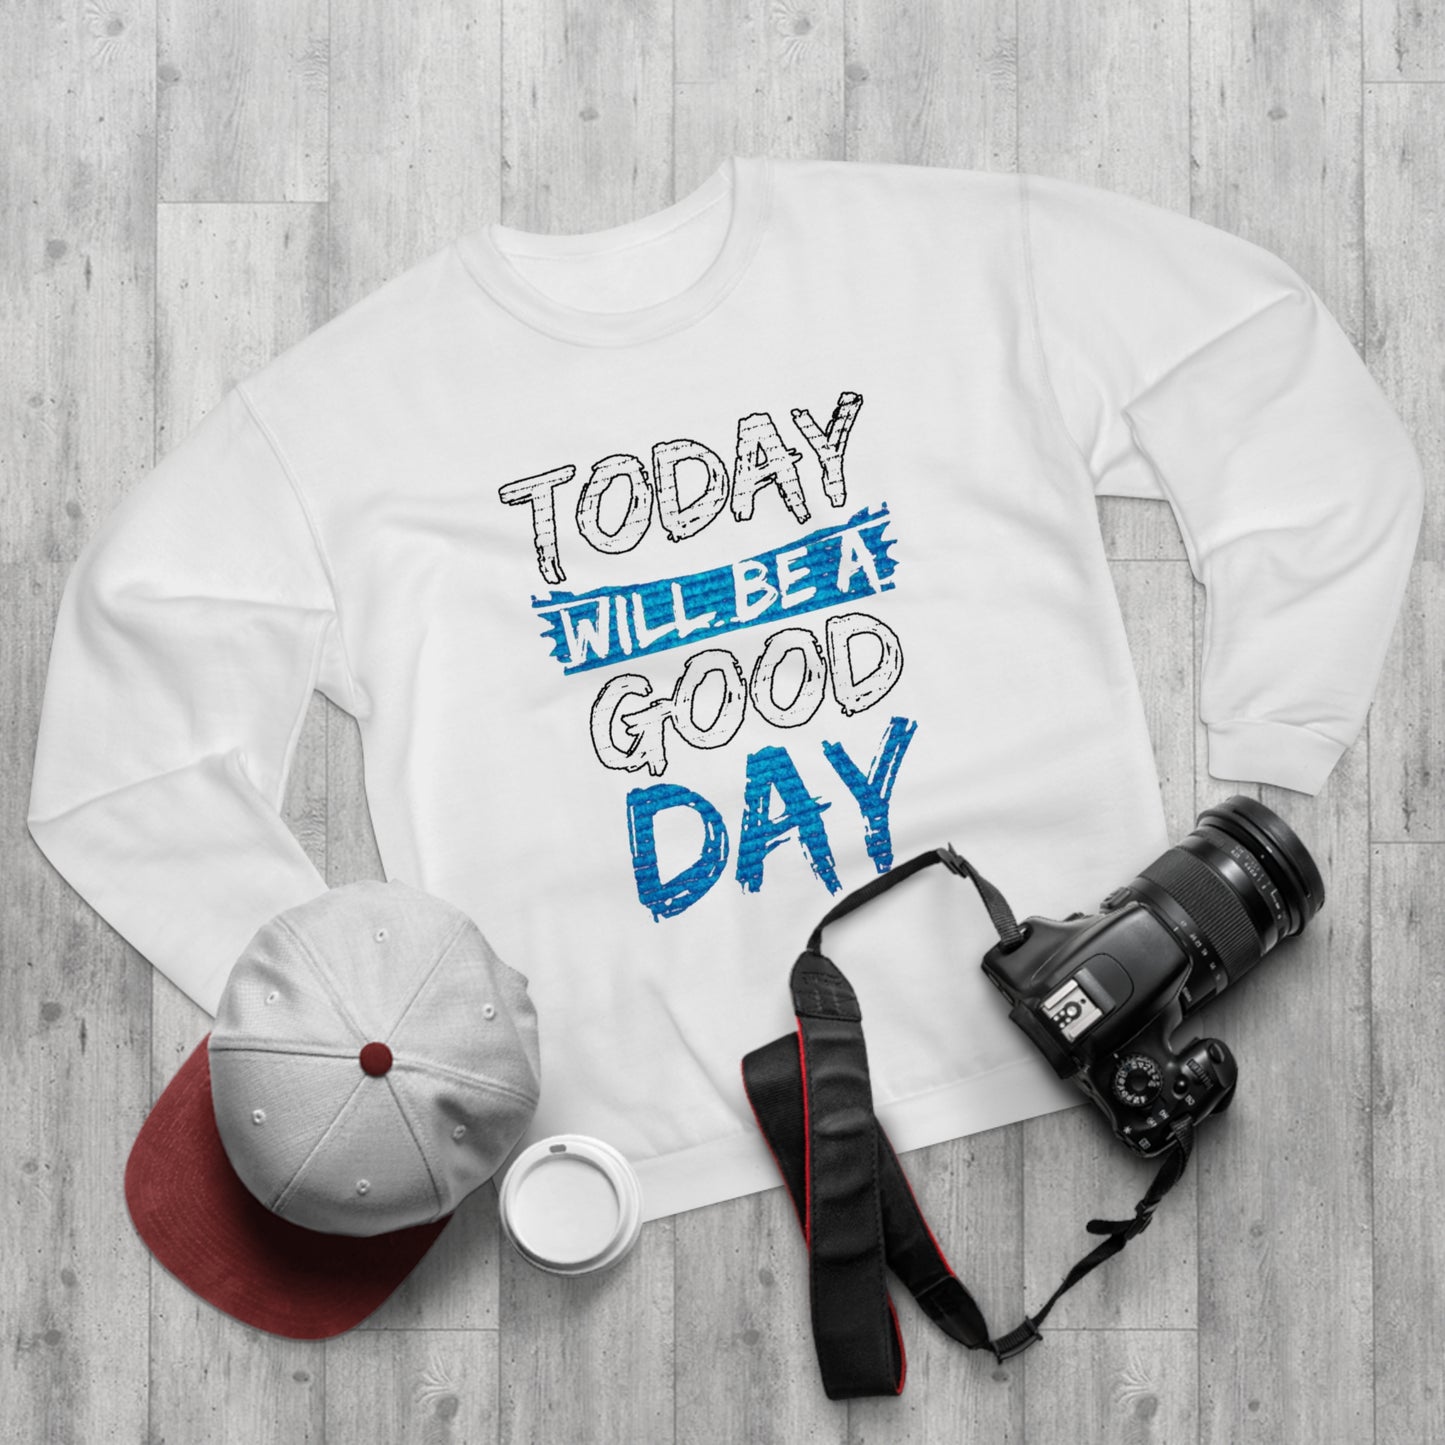 Today Will Be A Good Day High Quality Unisex Heavy Blend™ Crewneck Sweatshirt